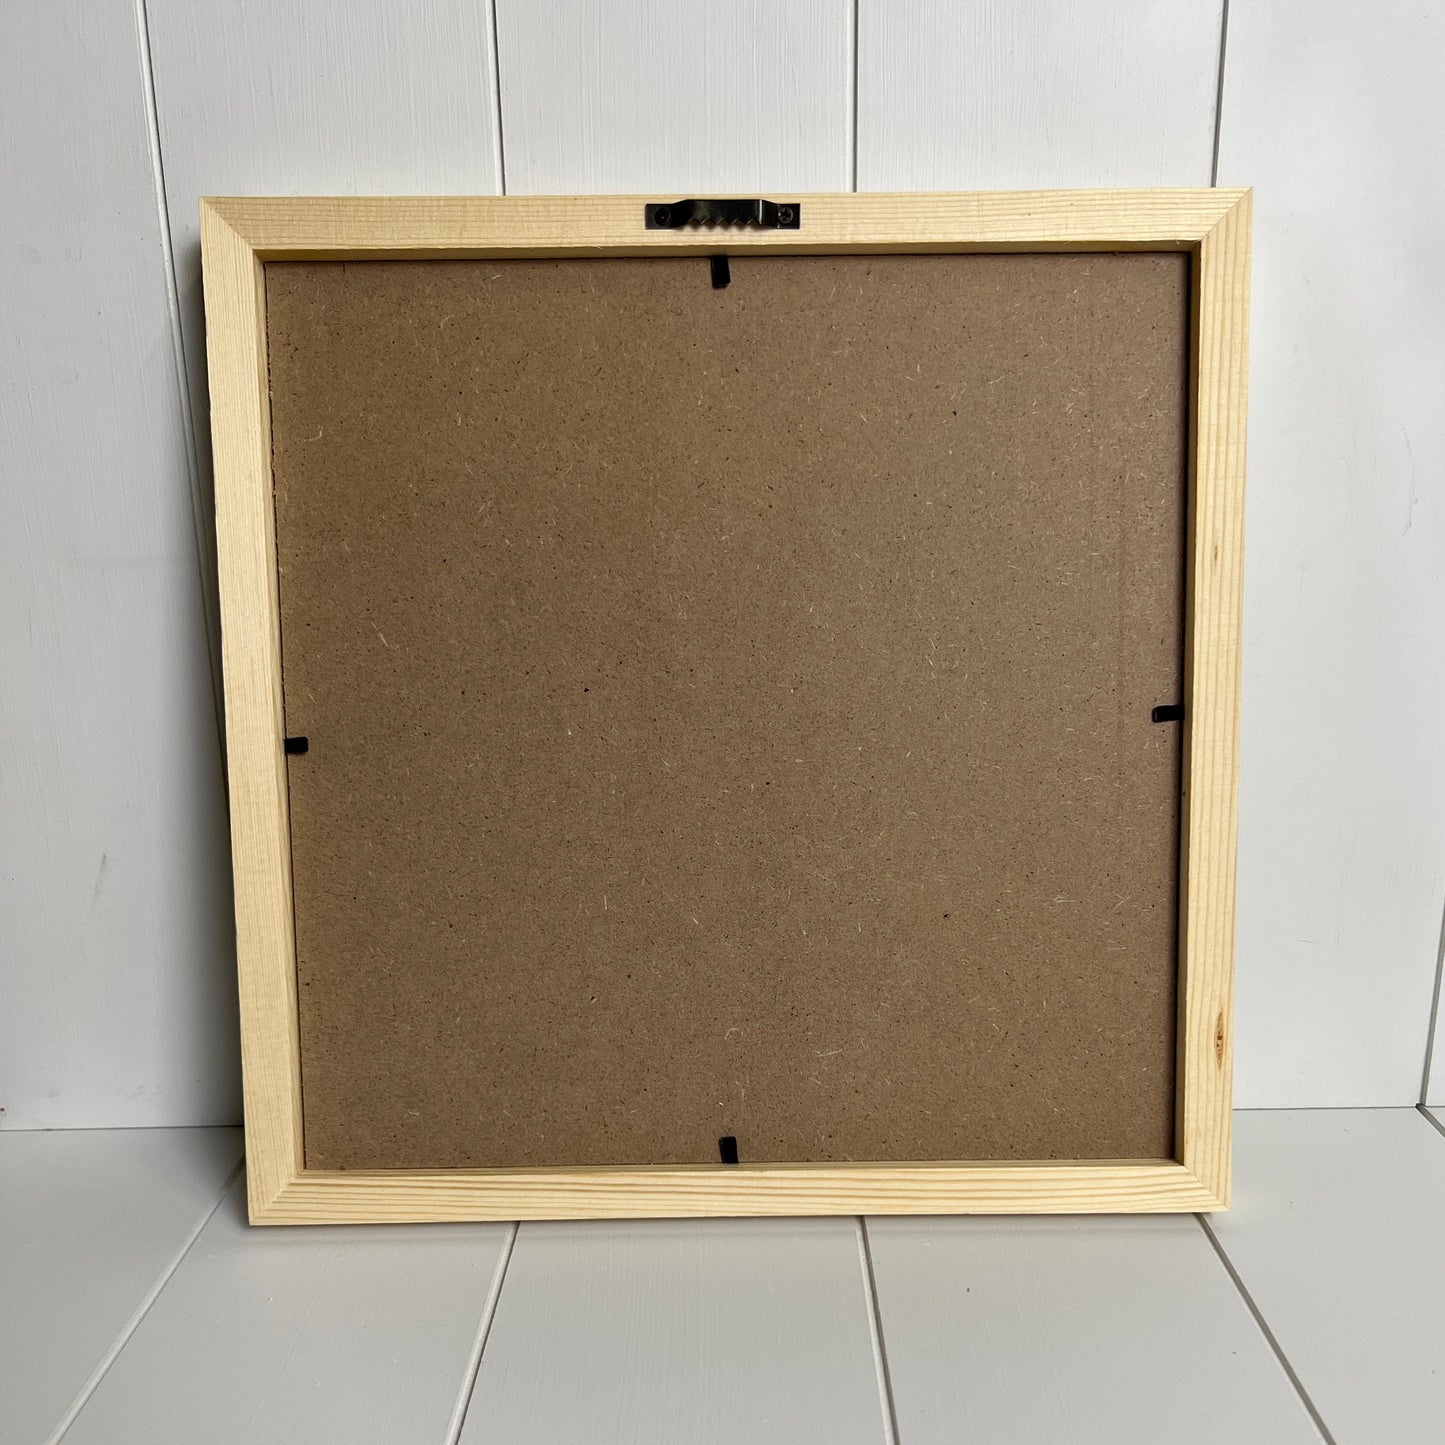 WHOLESALE: 16x16 inch Unstained Wood Frames with Removable Backs